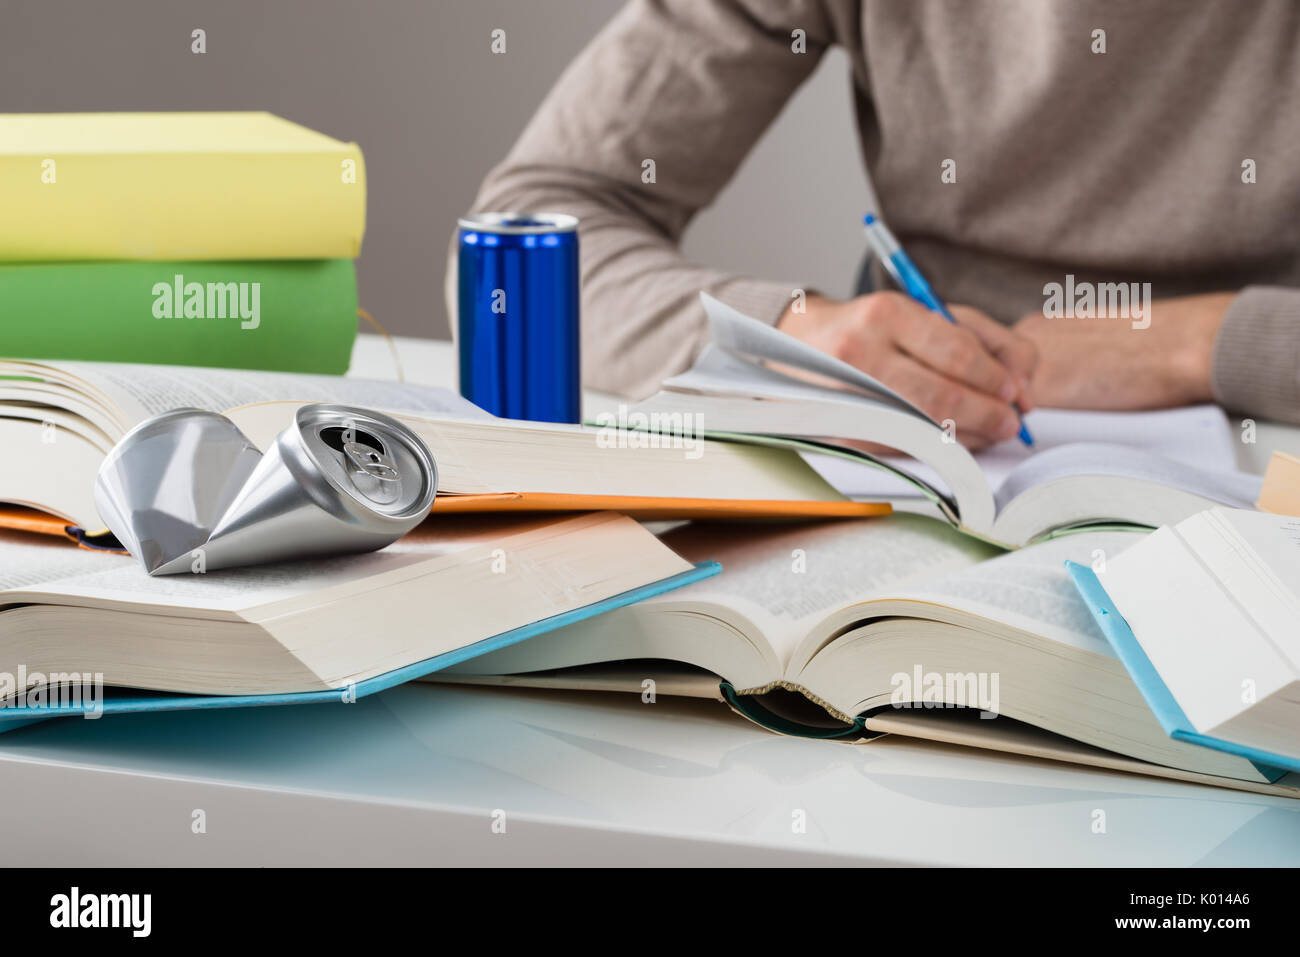 Midsection of male student studying with crashed drink can and books at table Stock Photo